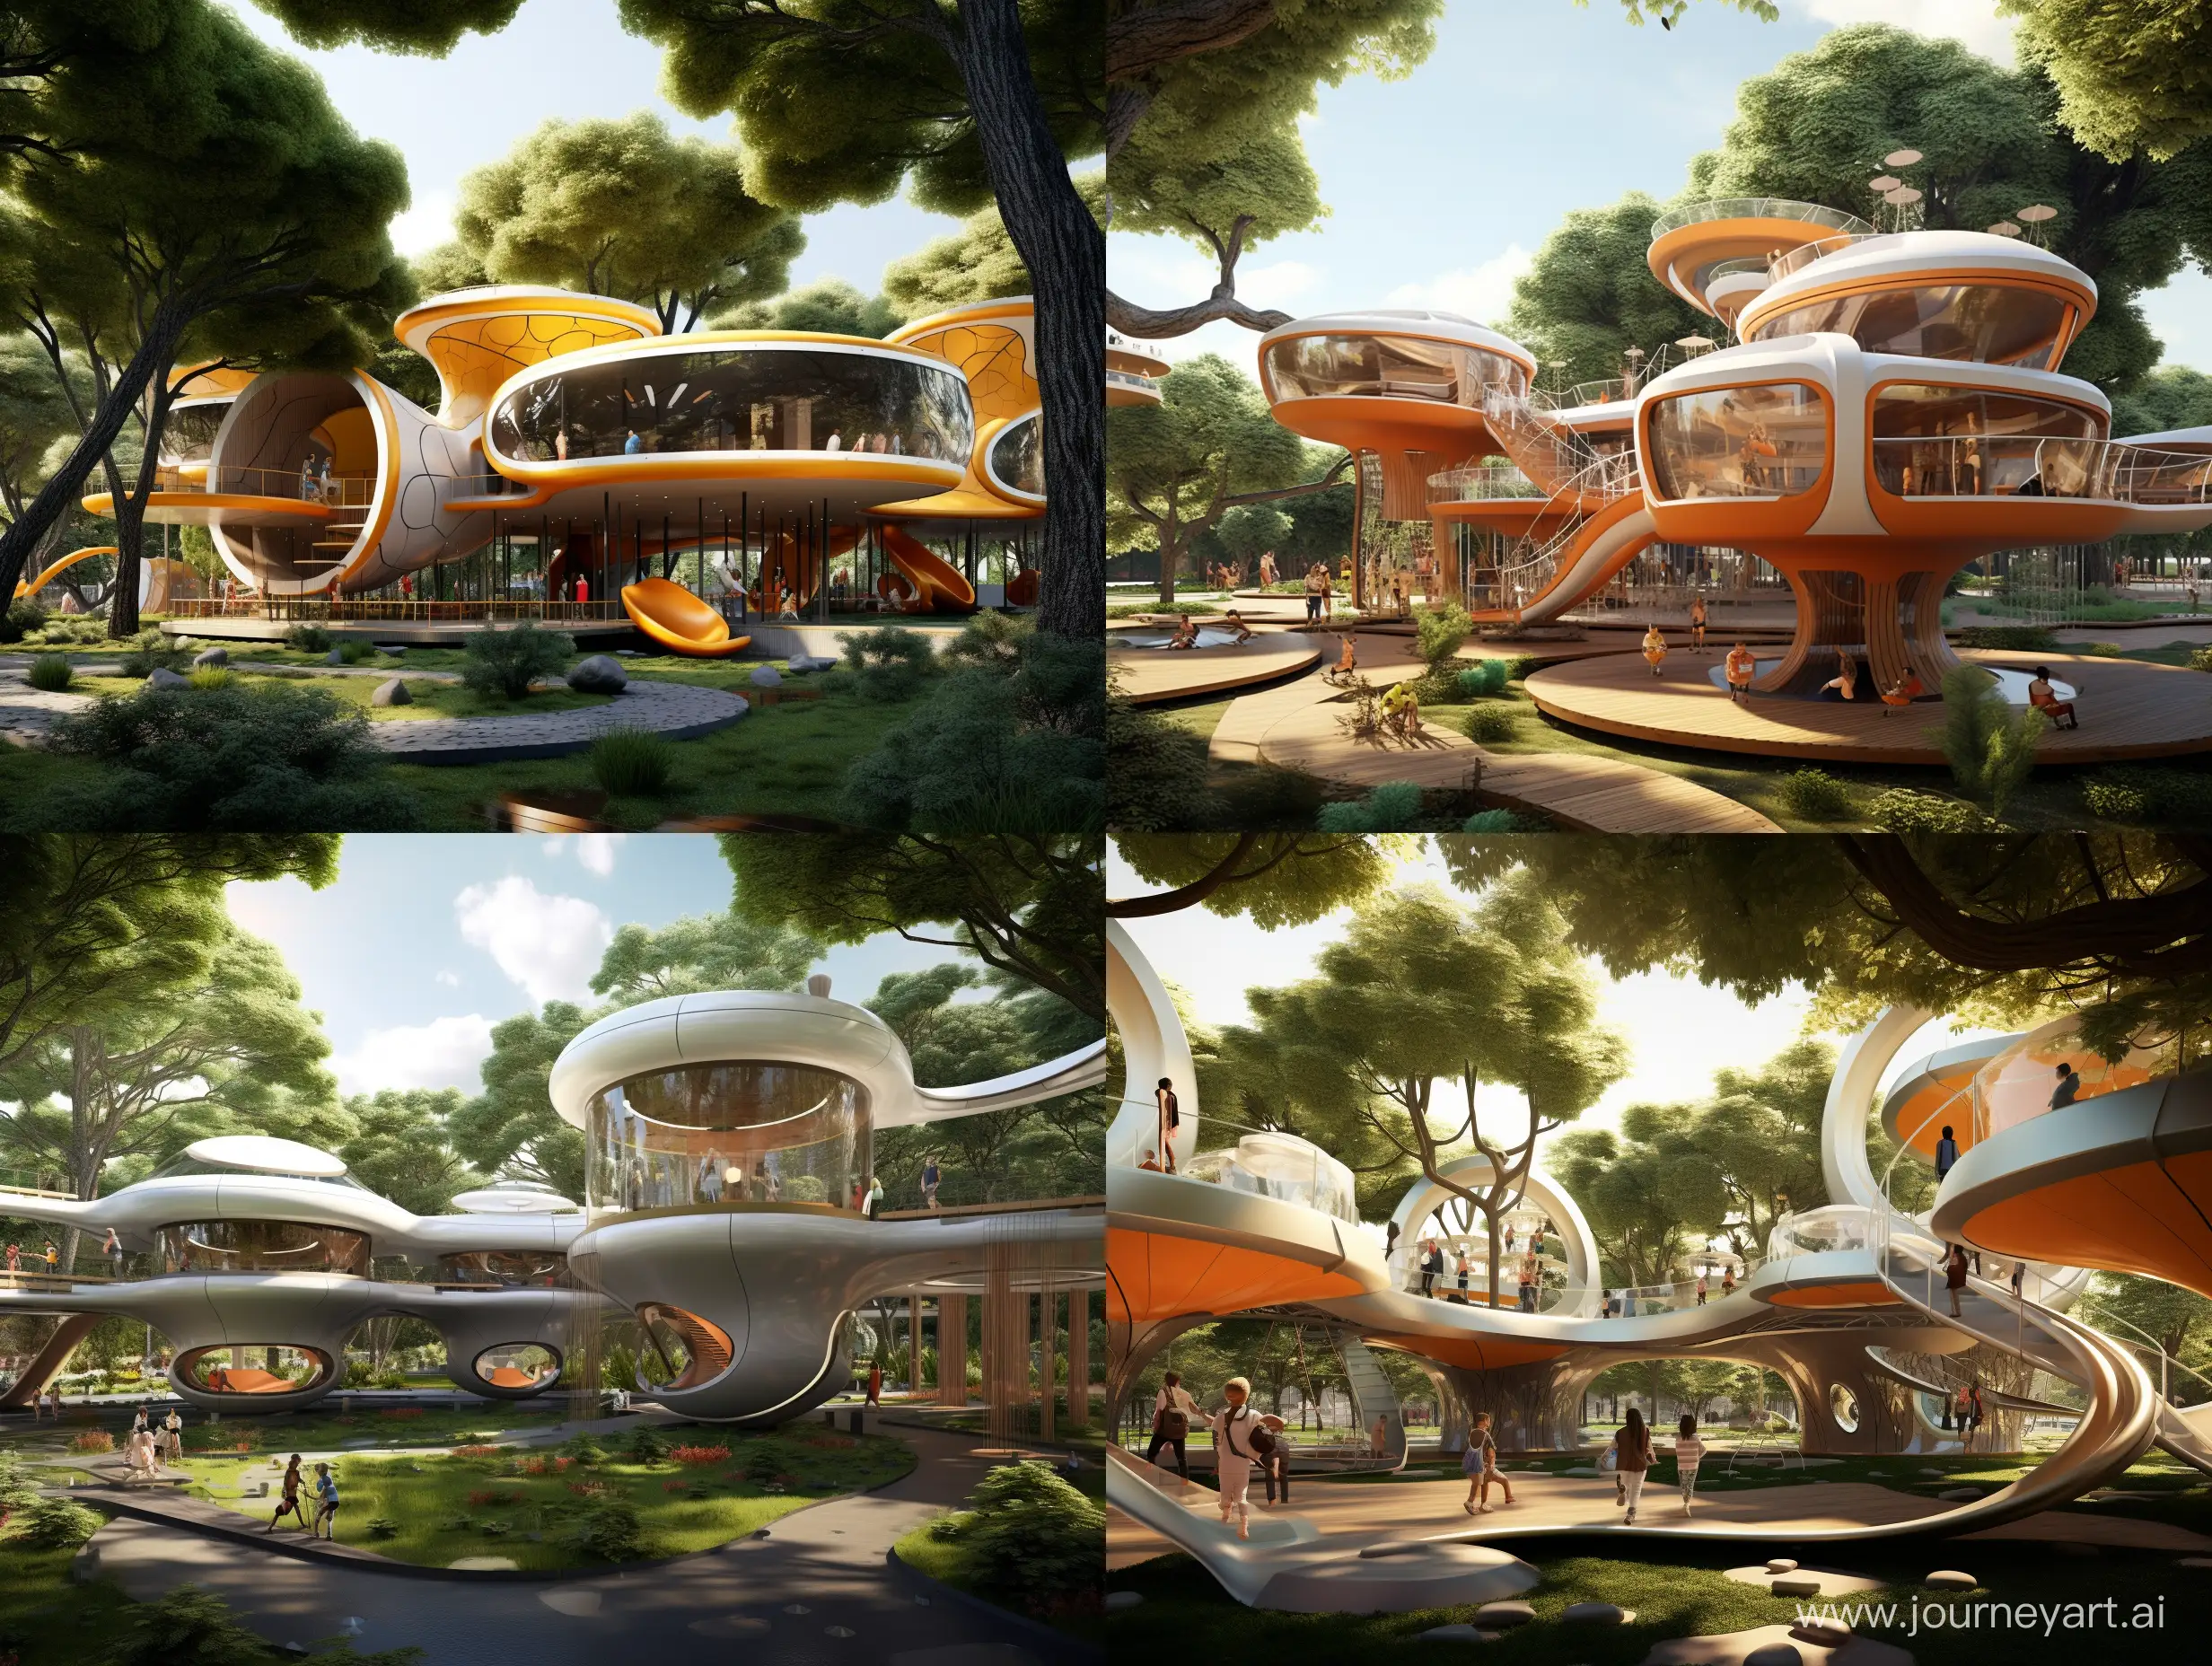 futuristic playarea for children between the trees with floating roof